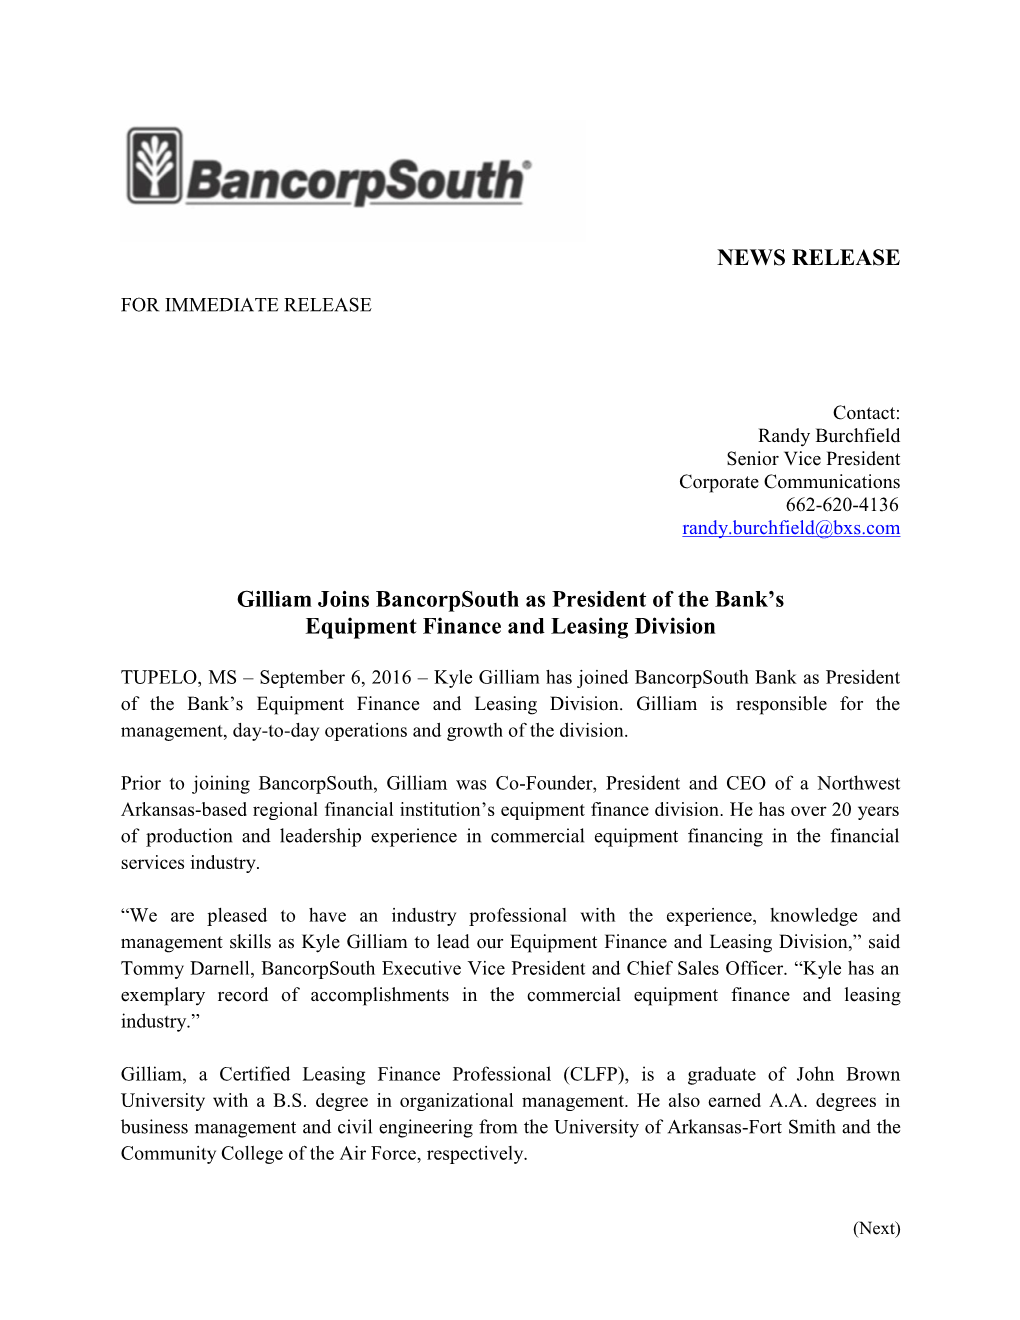 NEWS RELEASE Gilliam Joins Bancorpsouth As President of The